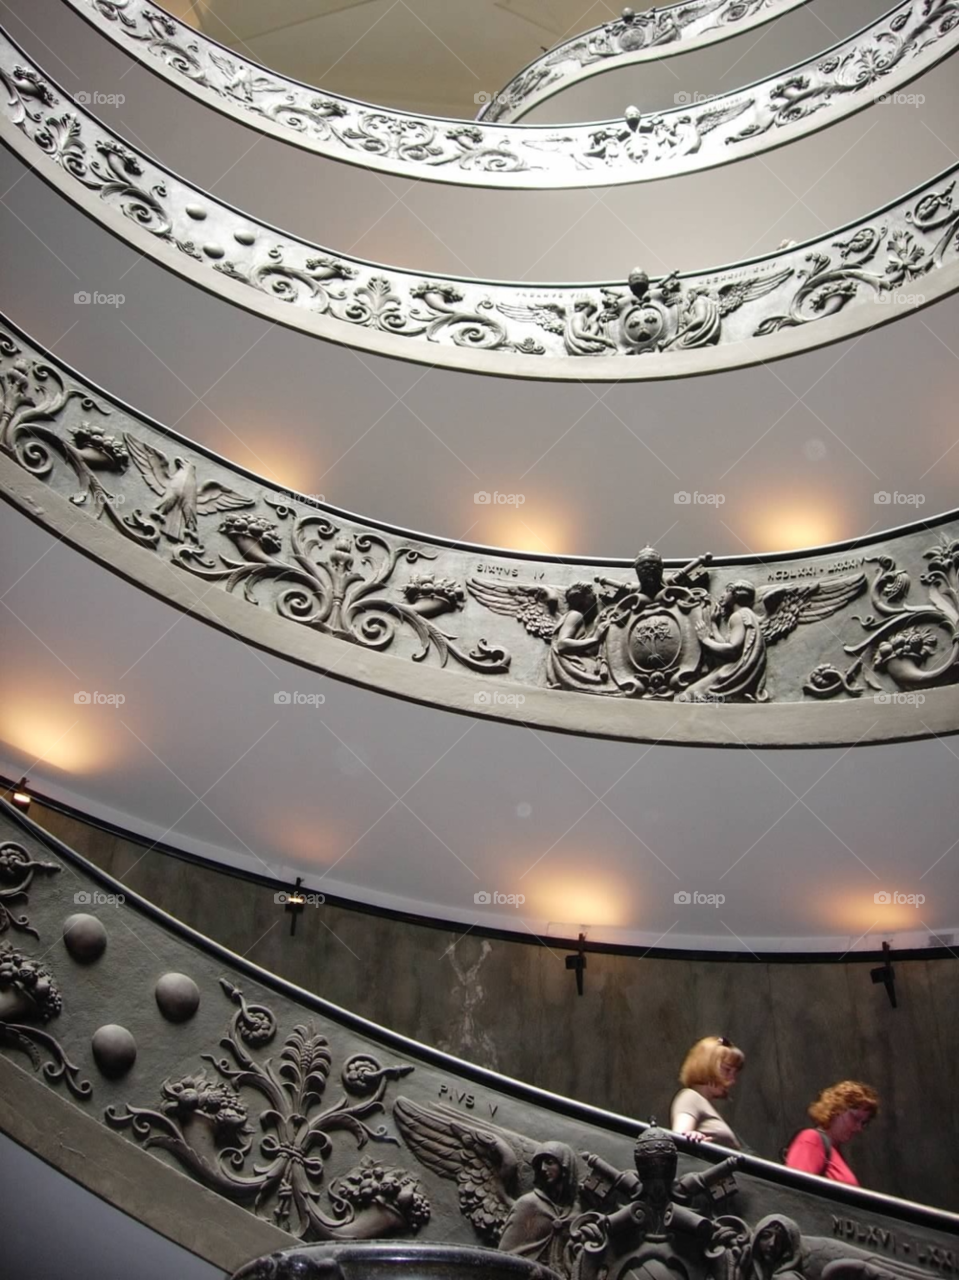 vatican museum stairs spiral by micheled312